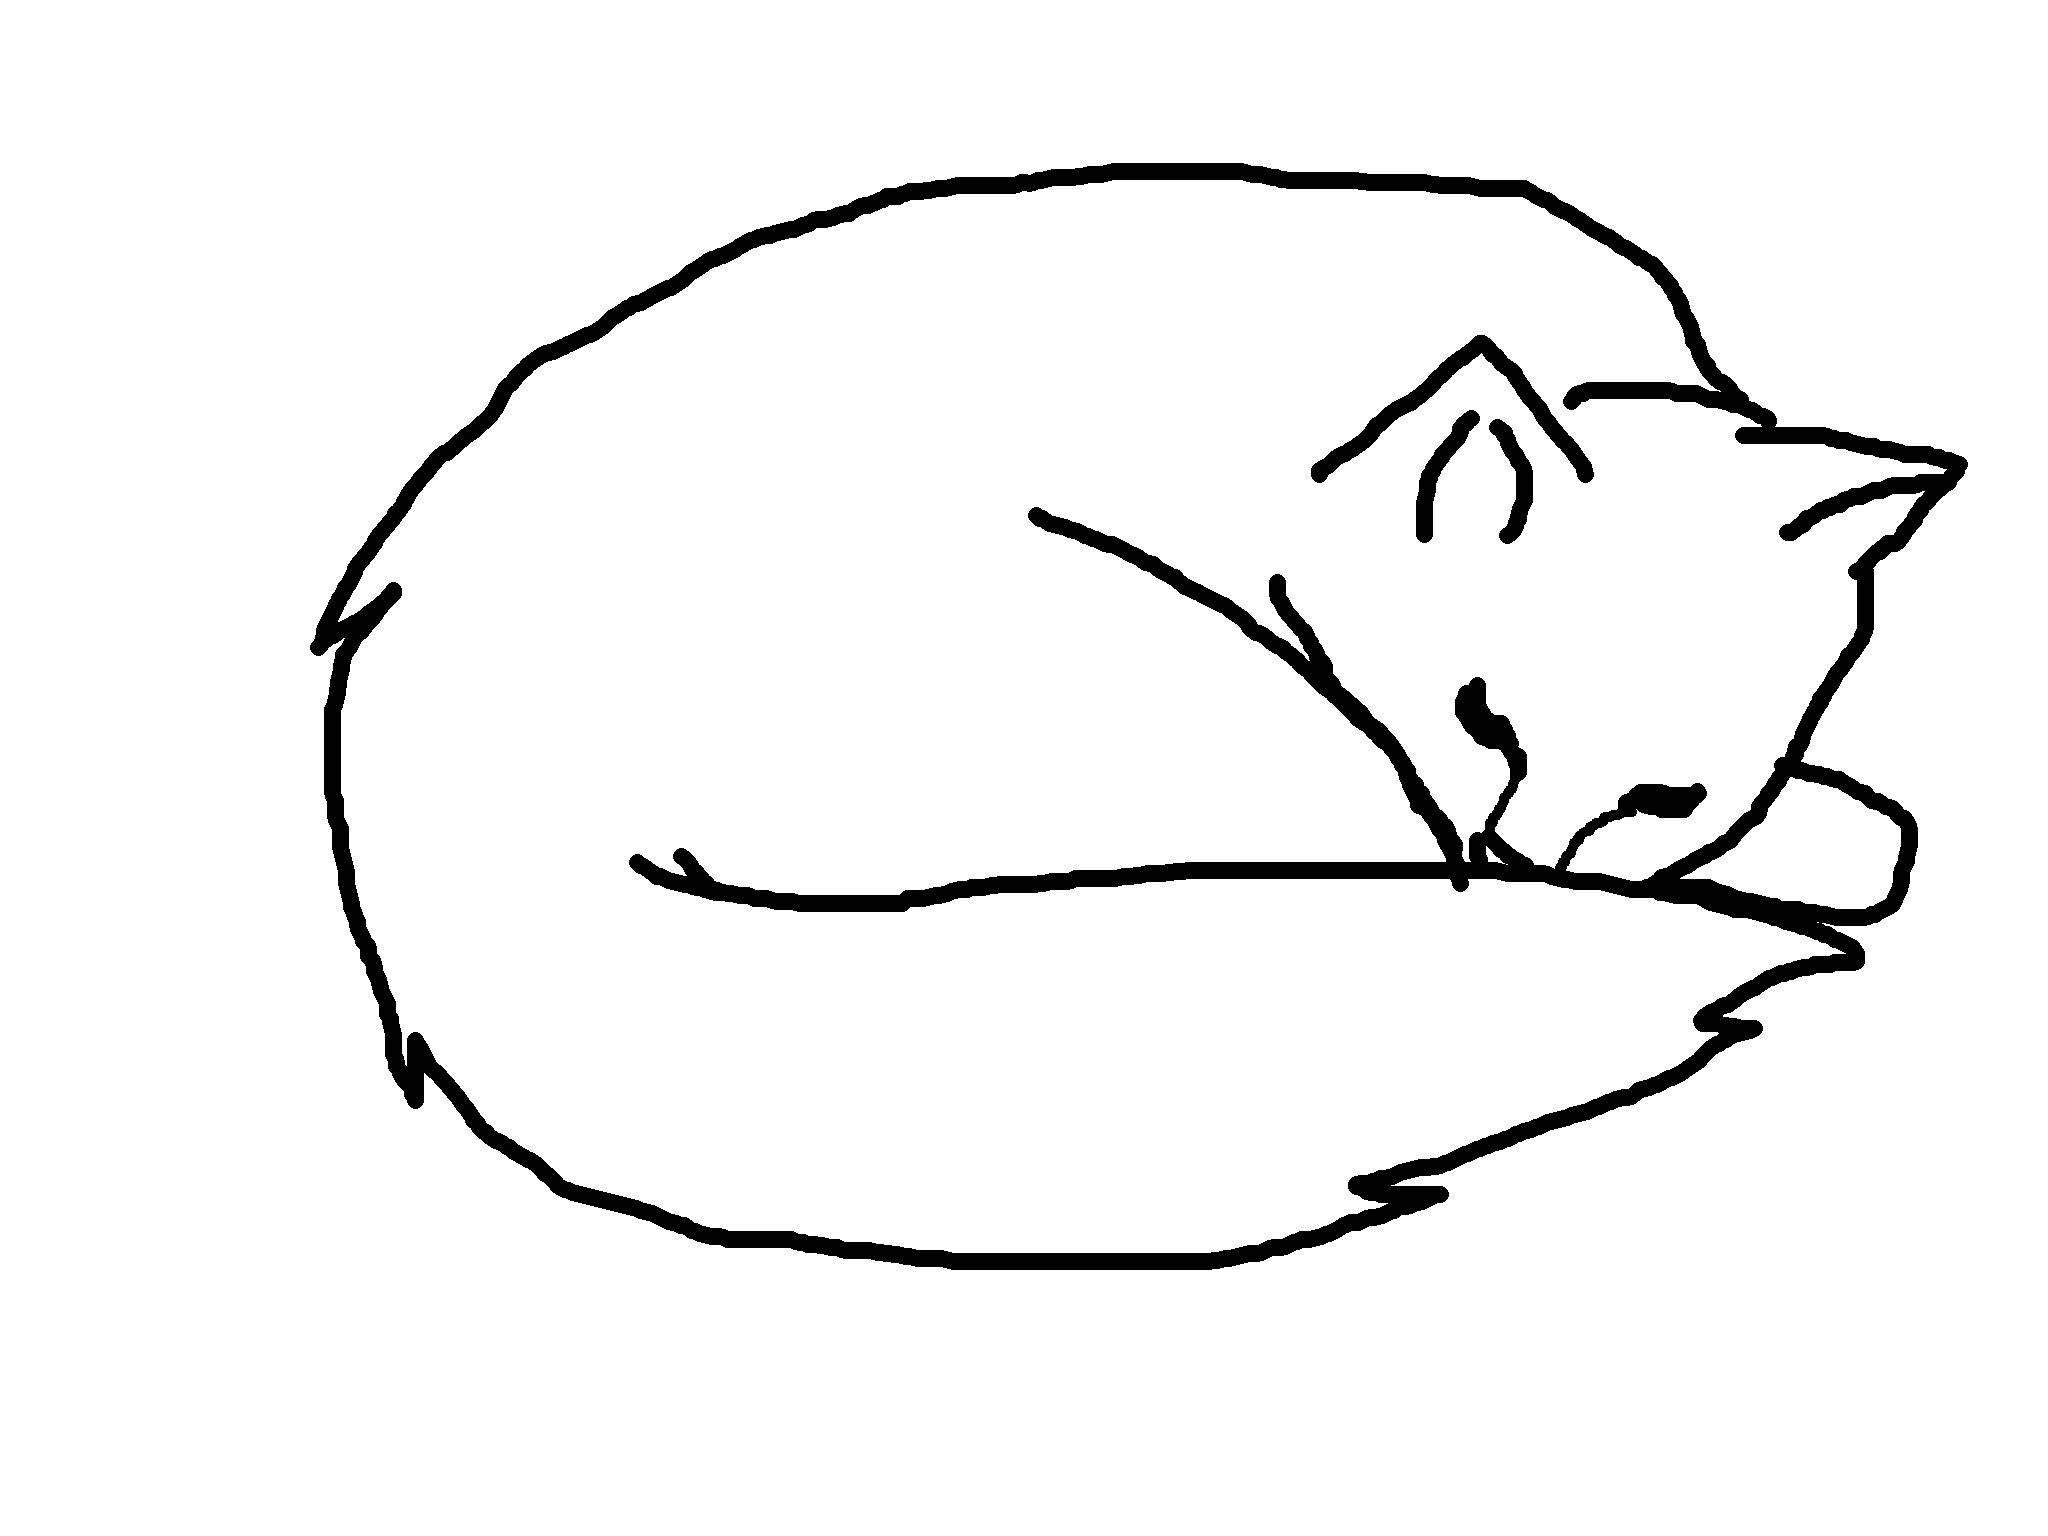 Realistic sleeping cat lineart by Spottedheart22 on Clipart library